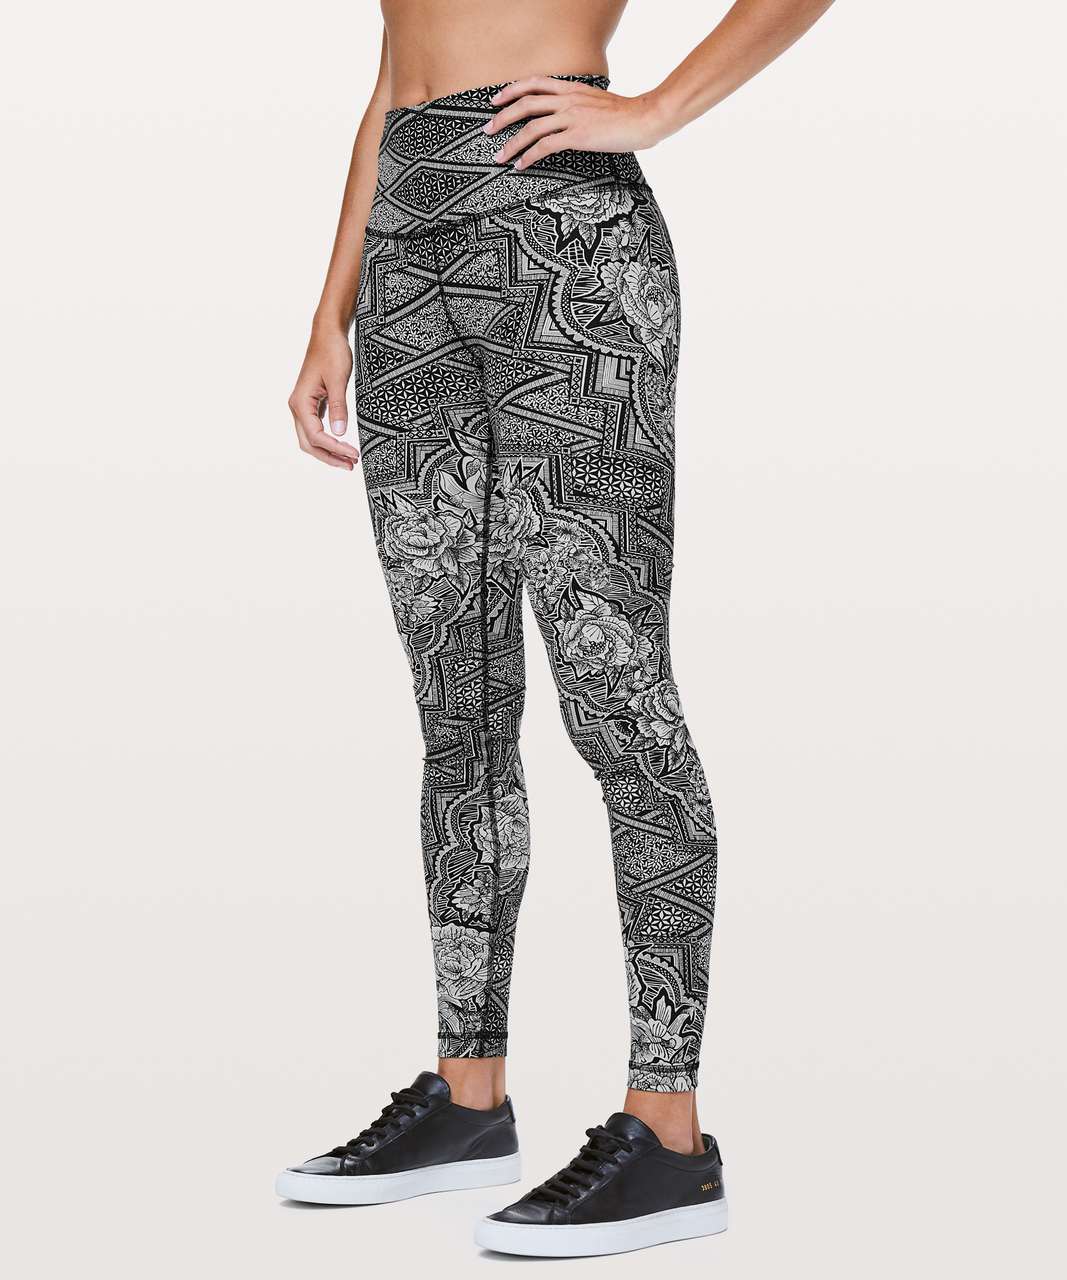 Lululemon Wunder Under High-Rise Leggings Mix & Mesh 28 inch size 6 Gray -  $50 (48% Off Retail) - From Krista